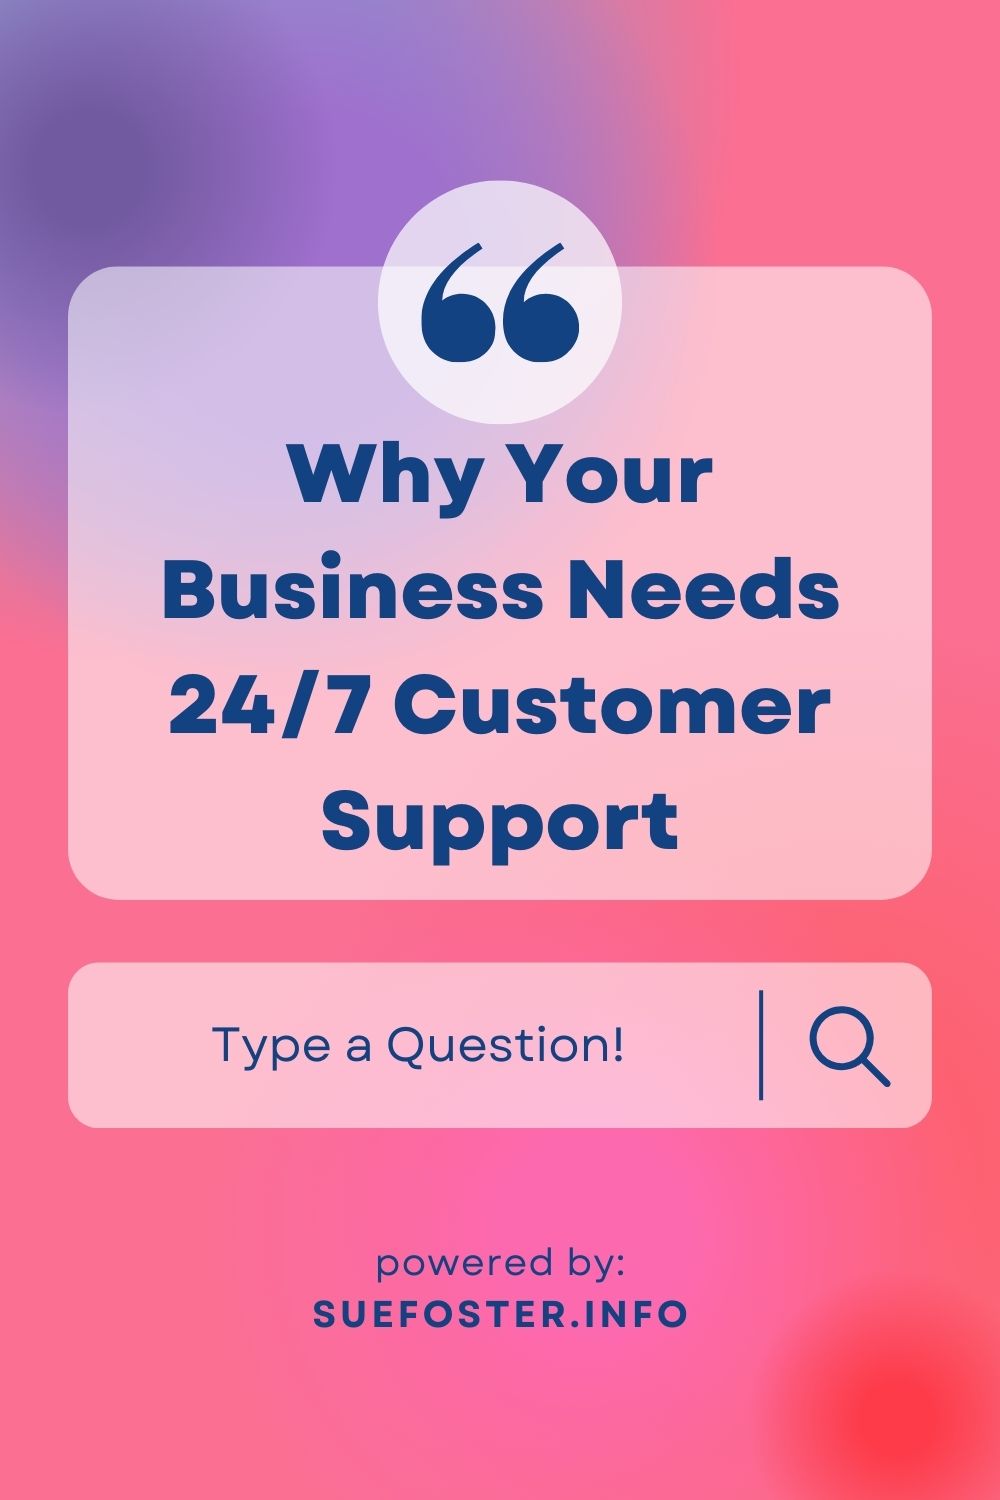 Offering 24/7 customer support is crucial for business success. Learn how chatbots, virtual receptionists, and online booking systems can enhance customer service and boost profits.